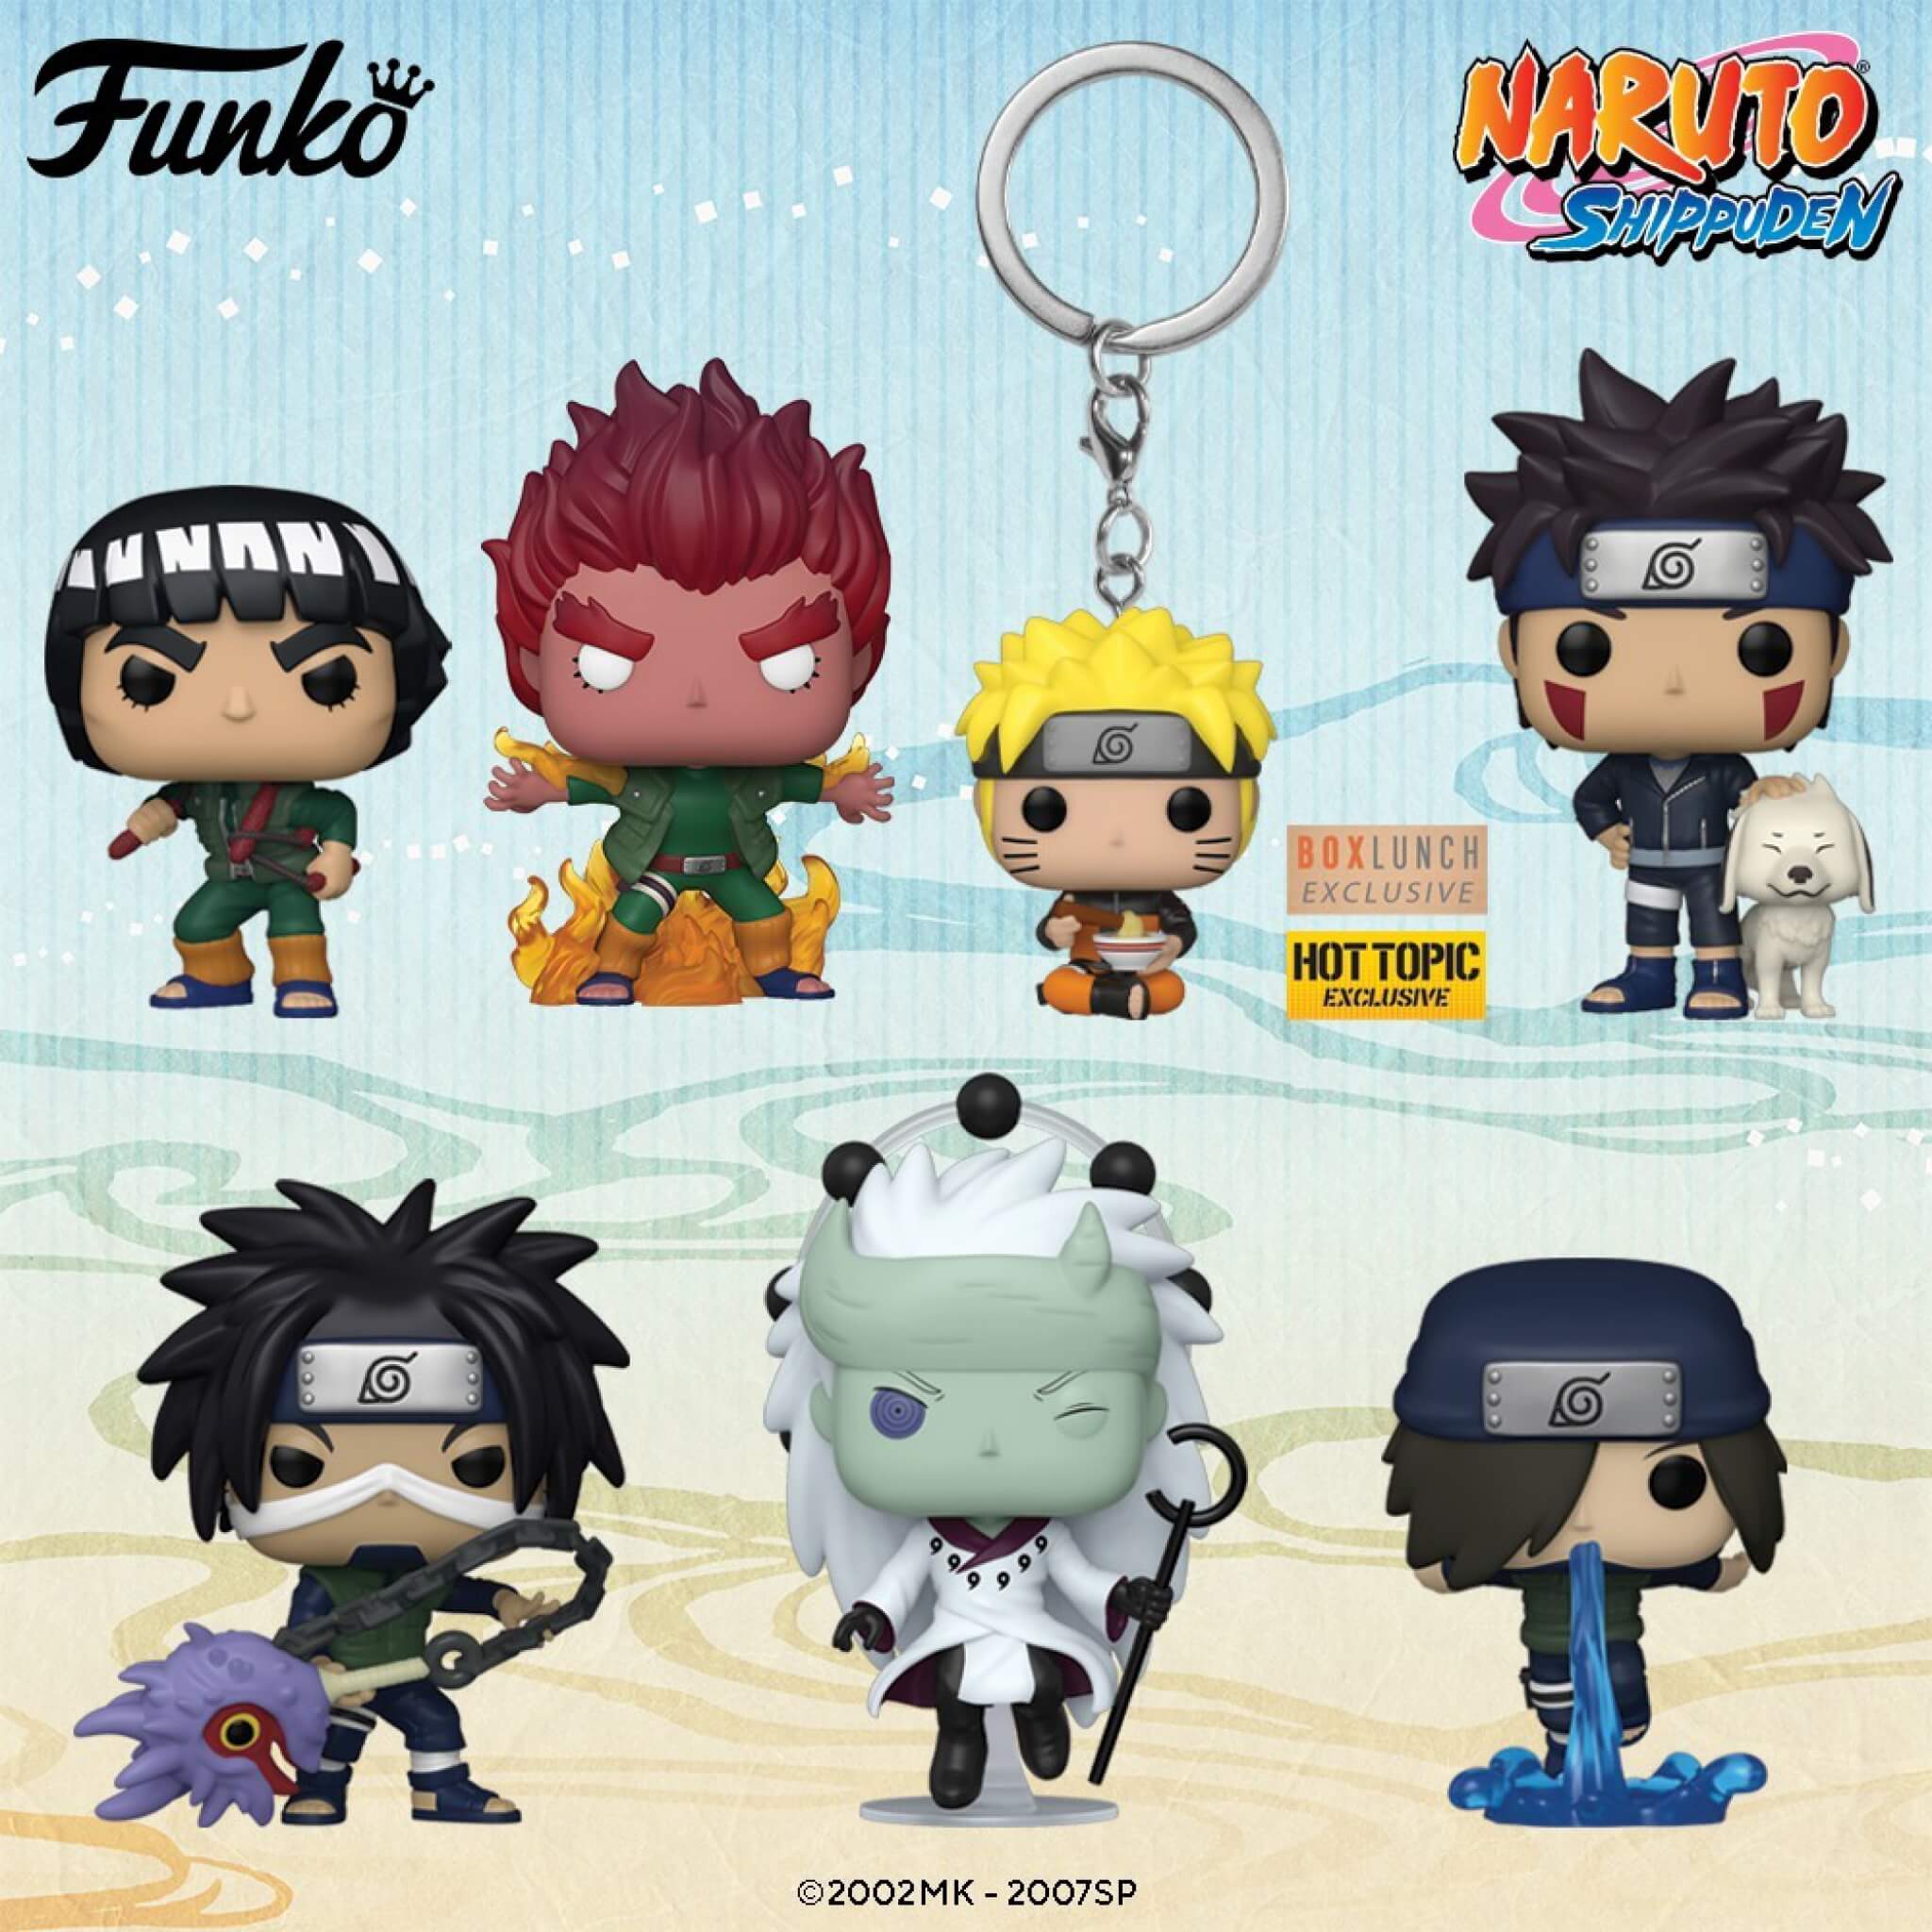 A flood of new Naruto POP figures